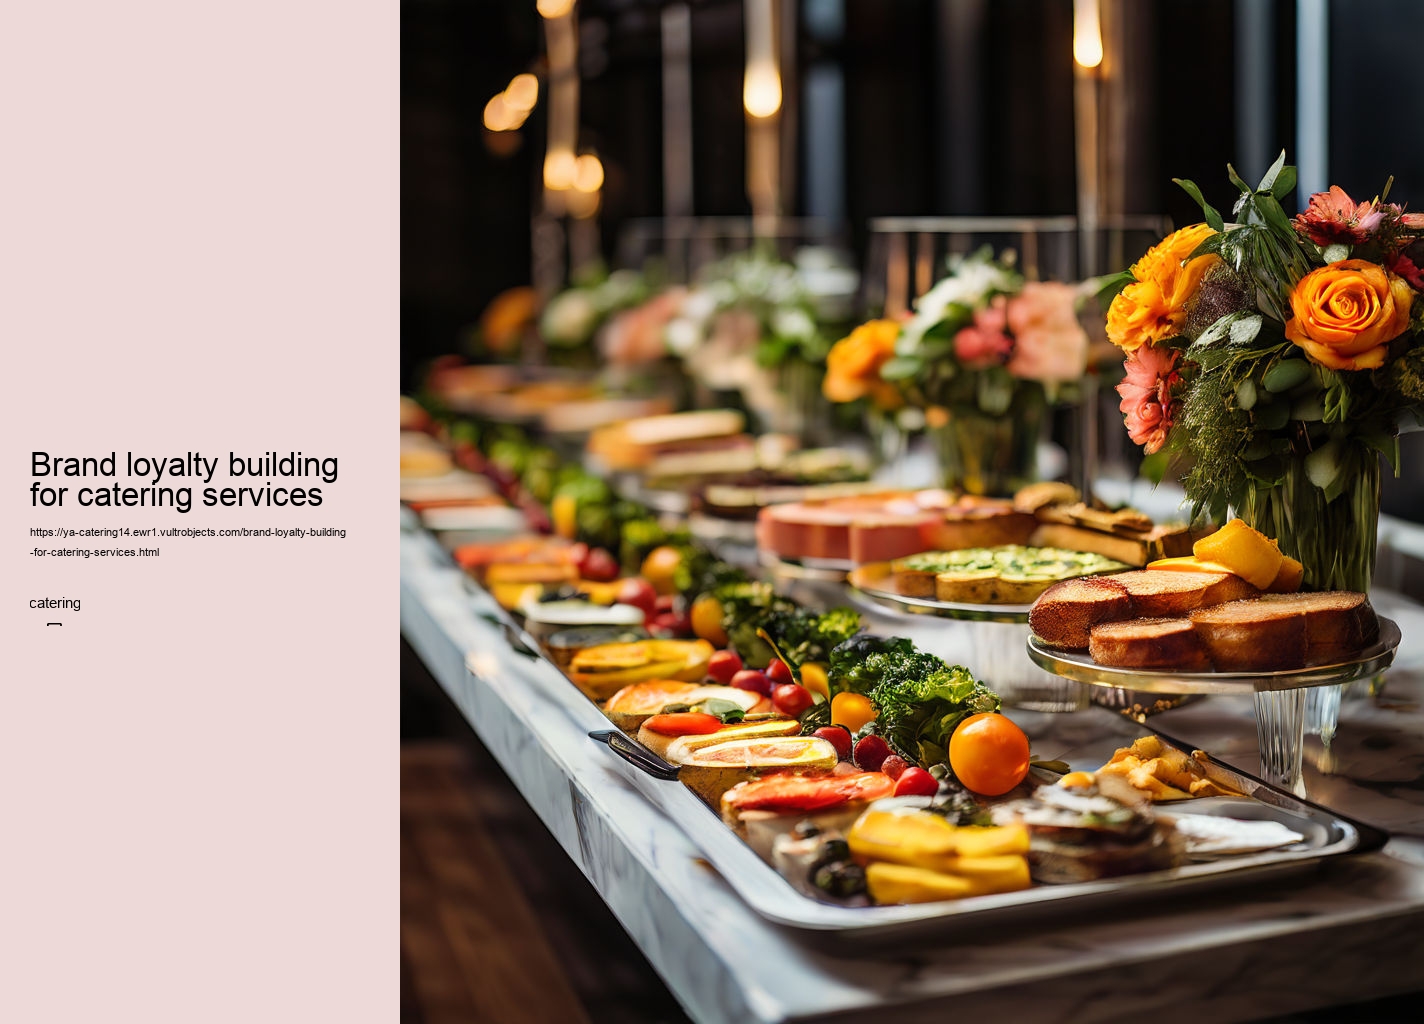 Brand loyalty building for catering services